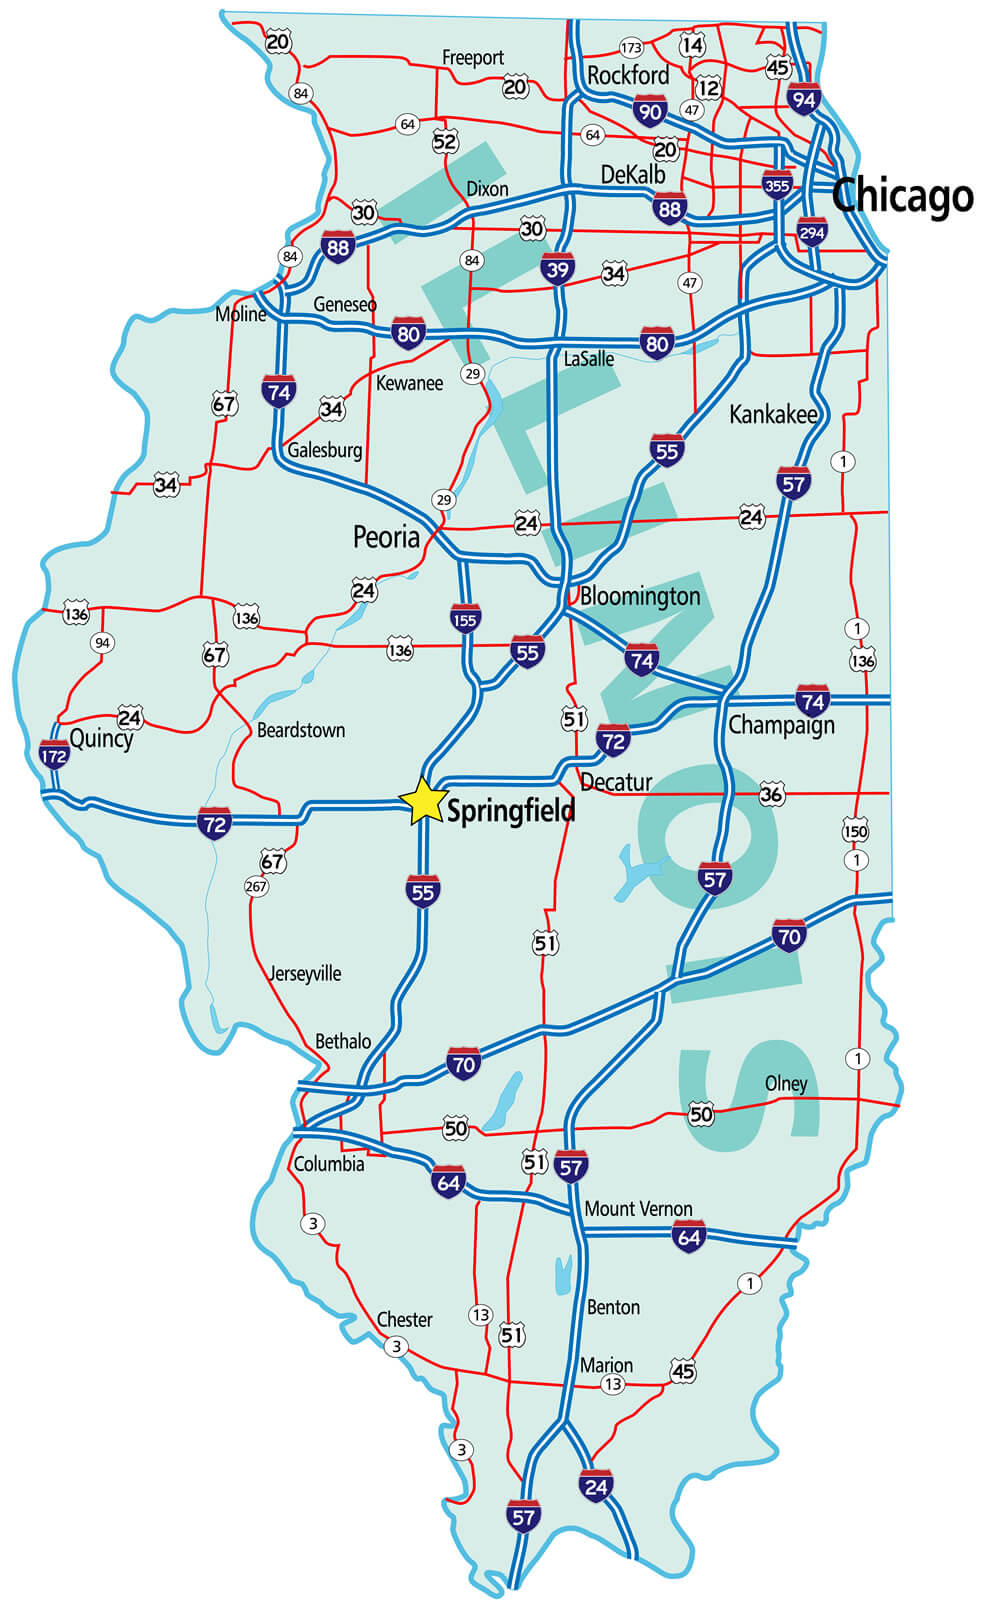 Illinois state road map